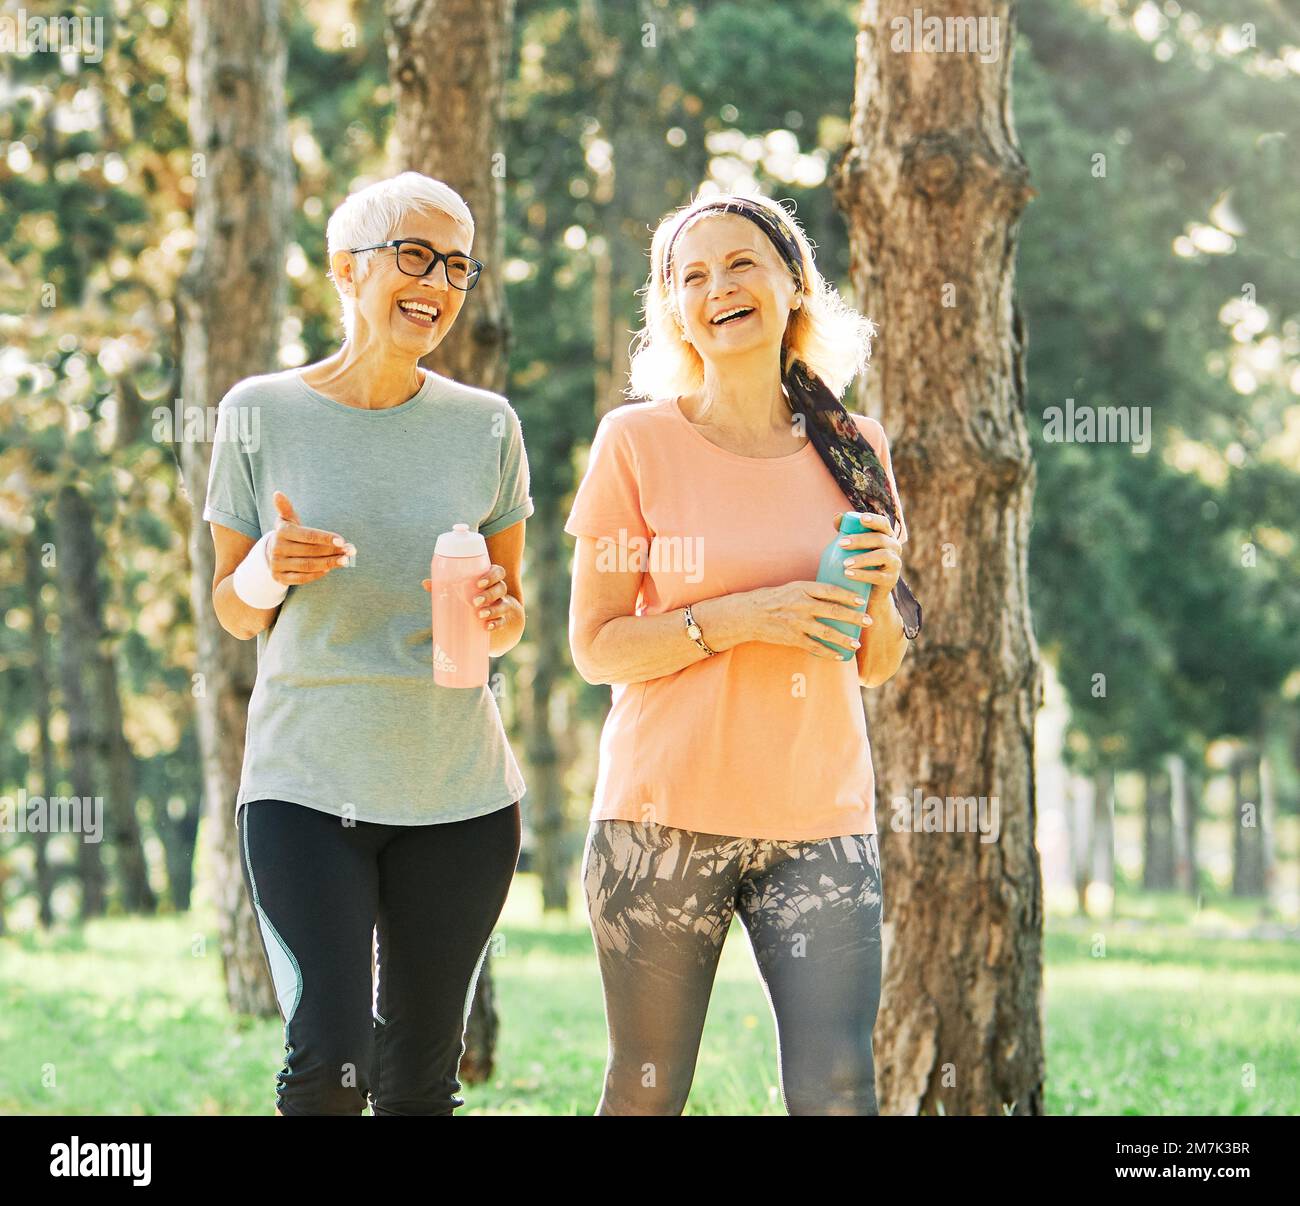 outdoor senior fitness woman man lifestyle active sport exercise healthy fit runner running jogging elderly mature gray hair Stock Photo